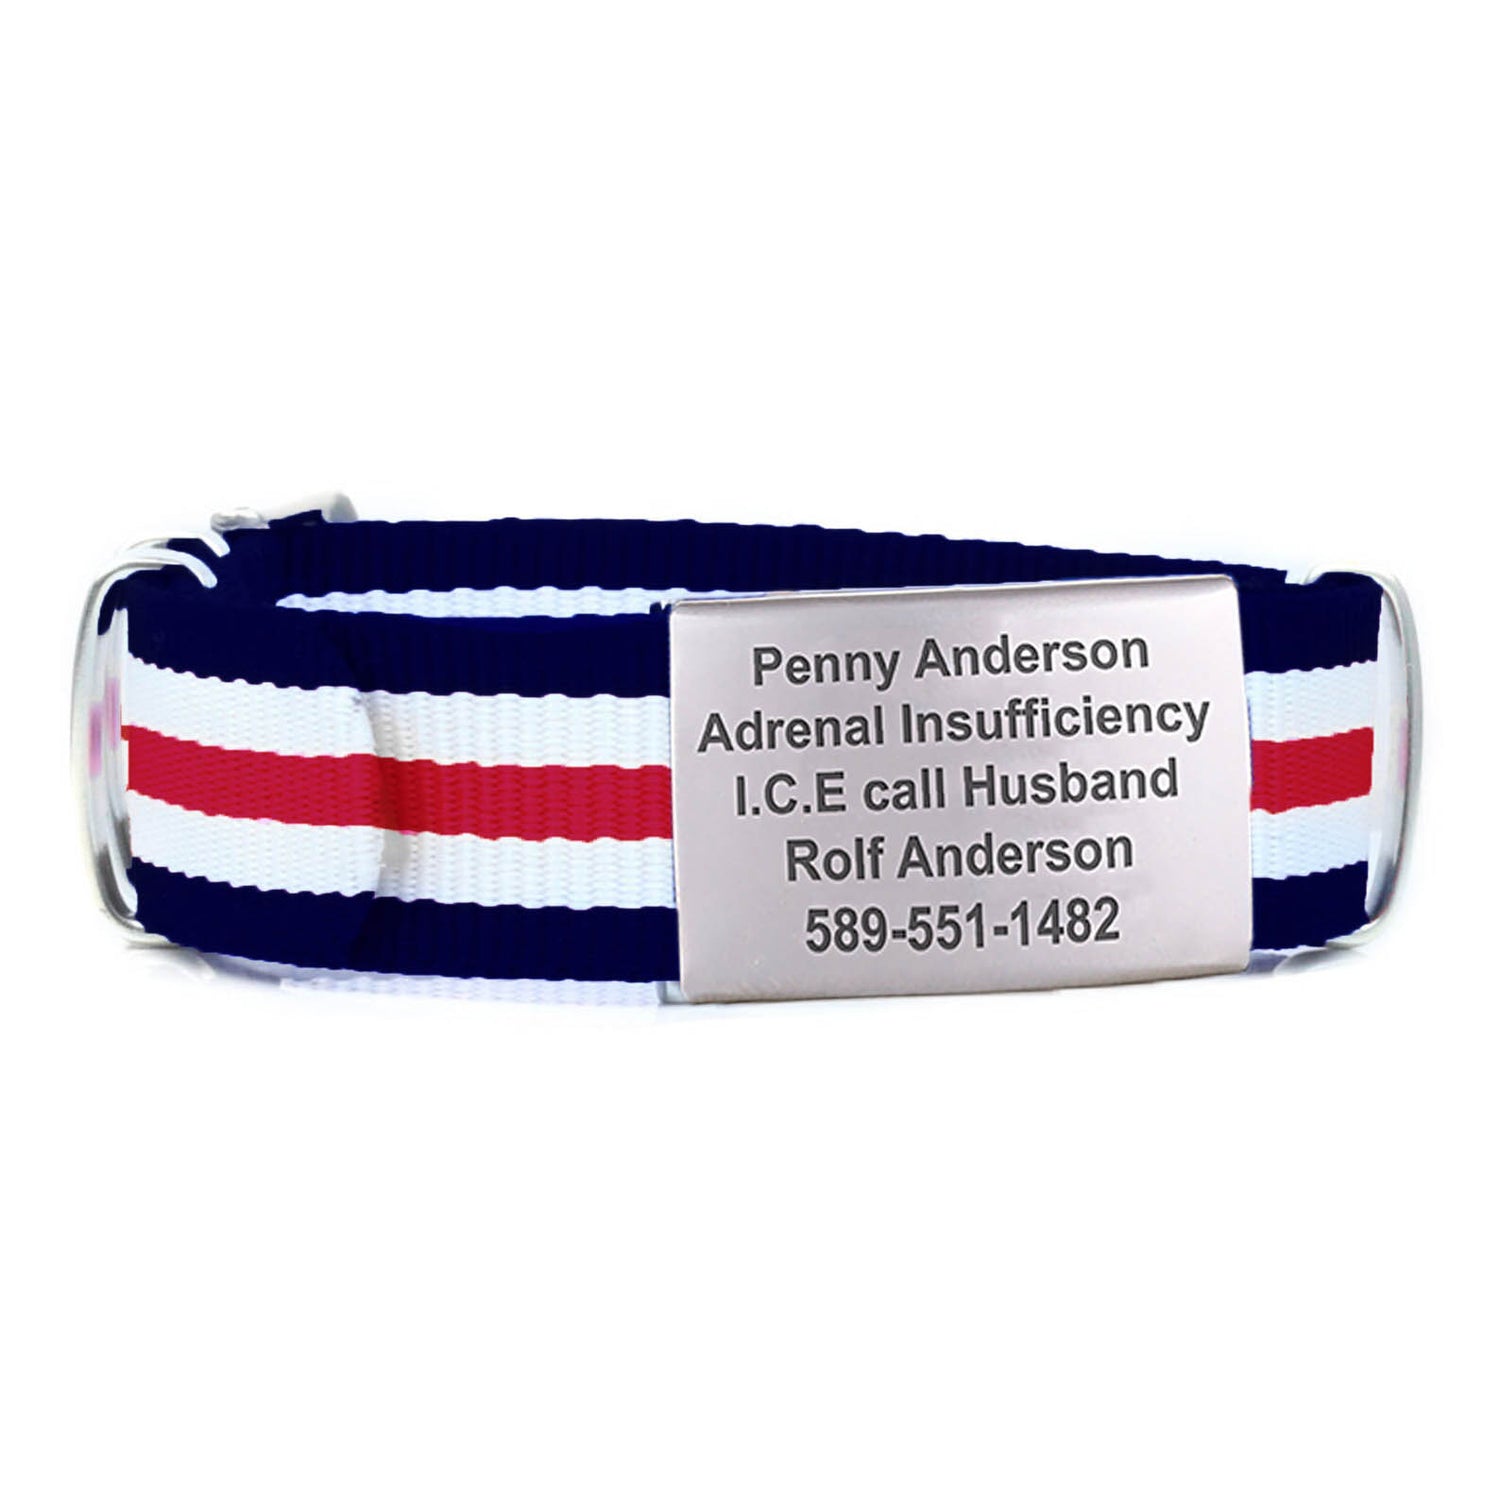 Fabric medical ID bracelet with customized stainless steel tag